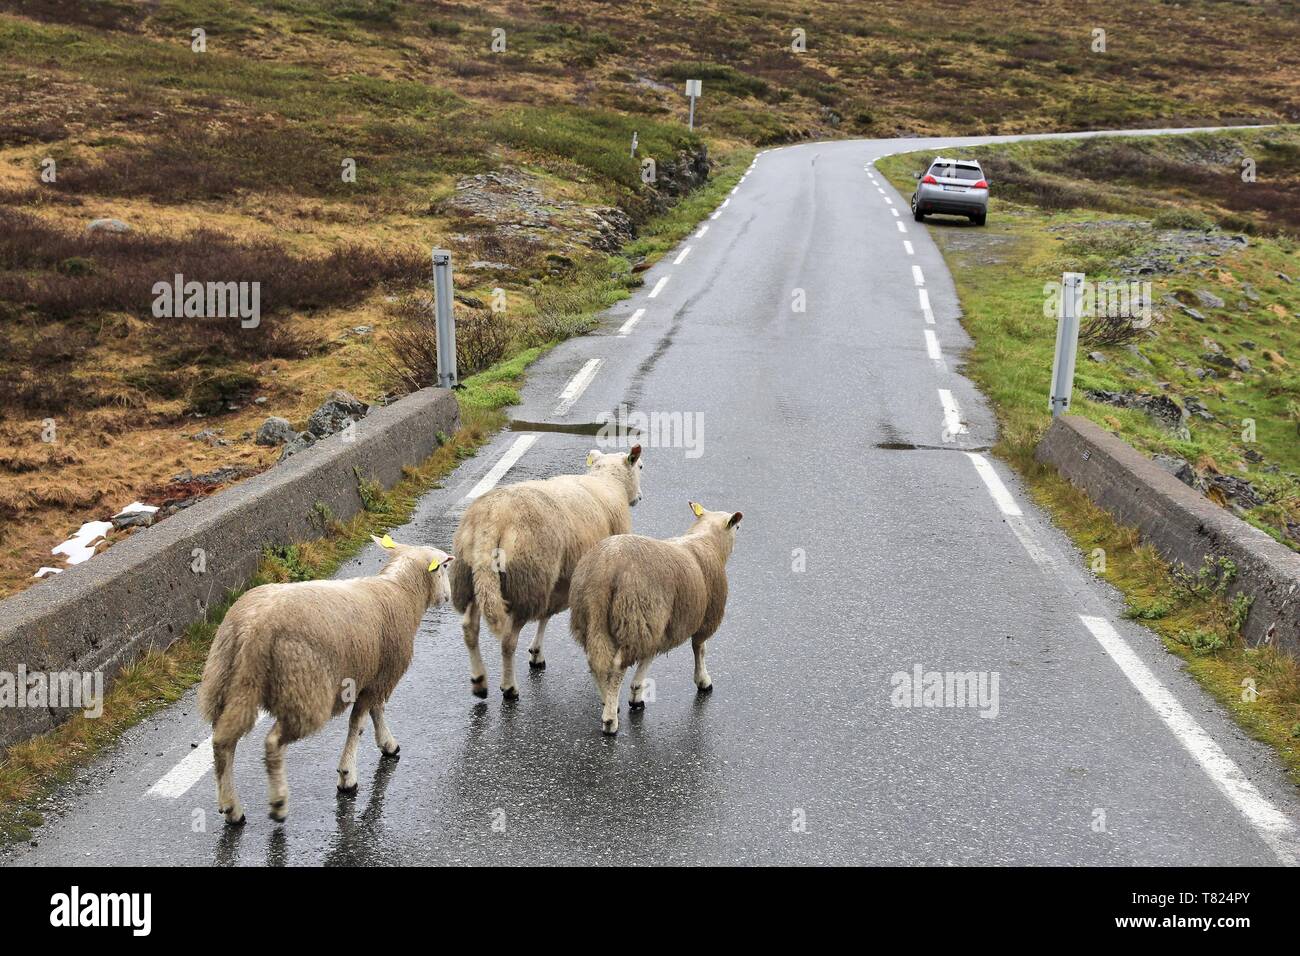 Sheep crossing the road in tundra biome landscape in Norway. Mountain landscape in rainy weather Aurlandsfjellet. Stock Photo